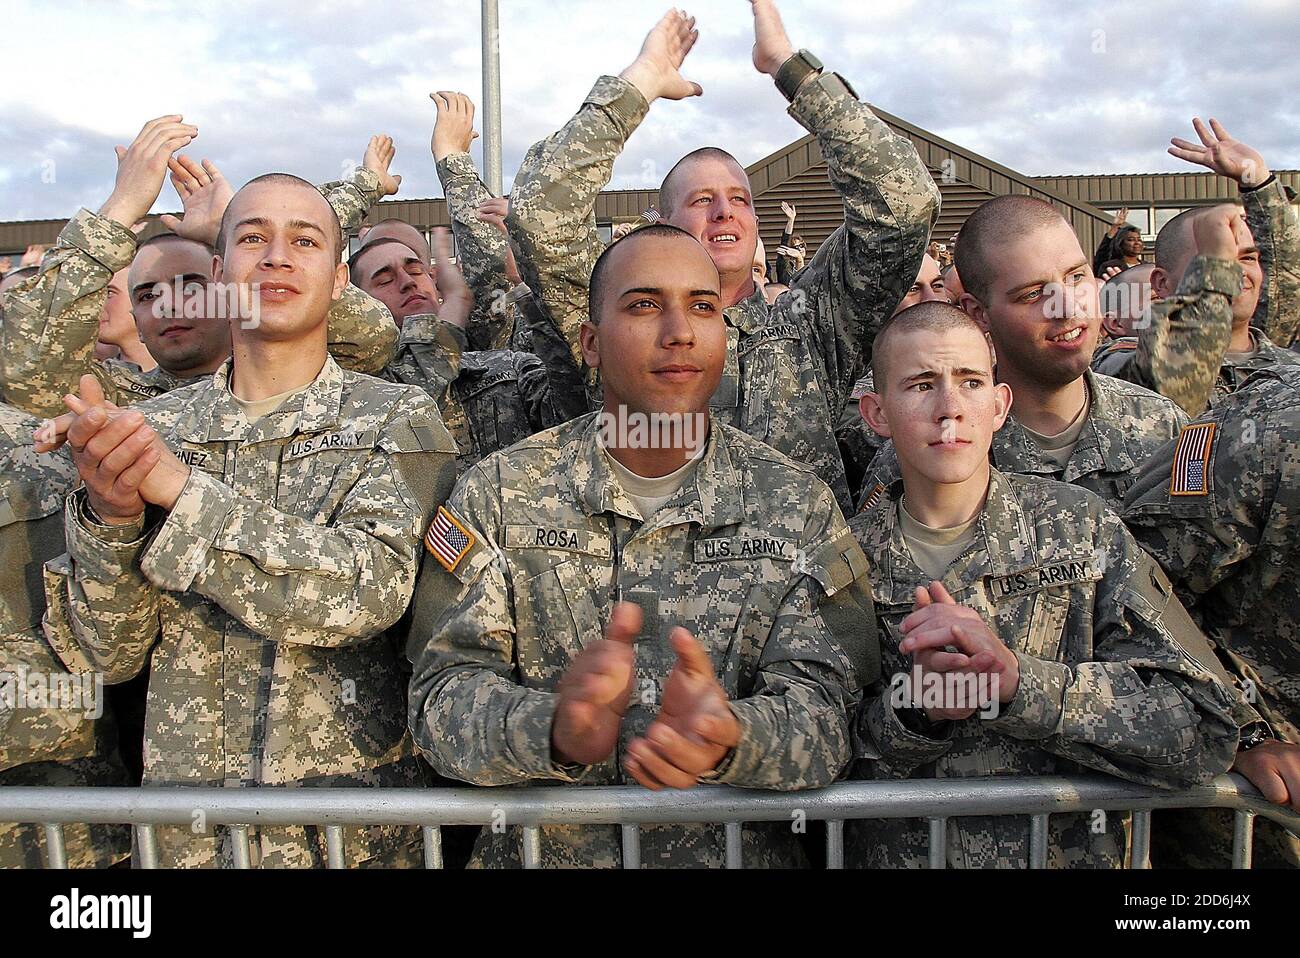 NO FILM, NO VIDEO, NO TV, NO DOCUMENTARY - Fort Benning soldiers applaud as President George W. Bush waives goodbye at Fort Benning, Georgia, Thursday, January 11, 2007. Photo by Mike Haskey/Columbus Ledger-Enquirer/MCT/ABACAPRESS.COM Stock Photo